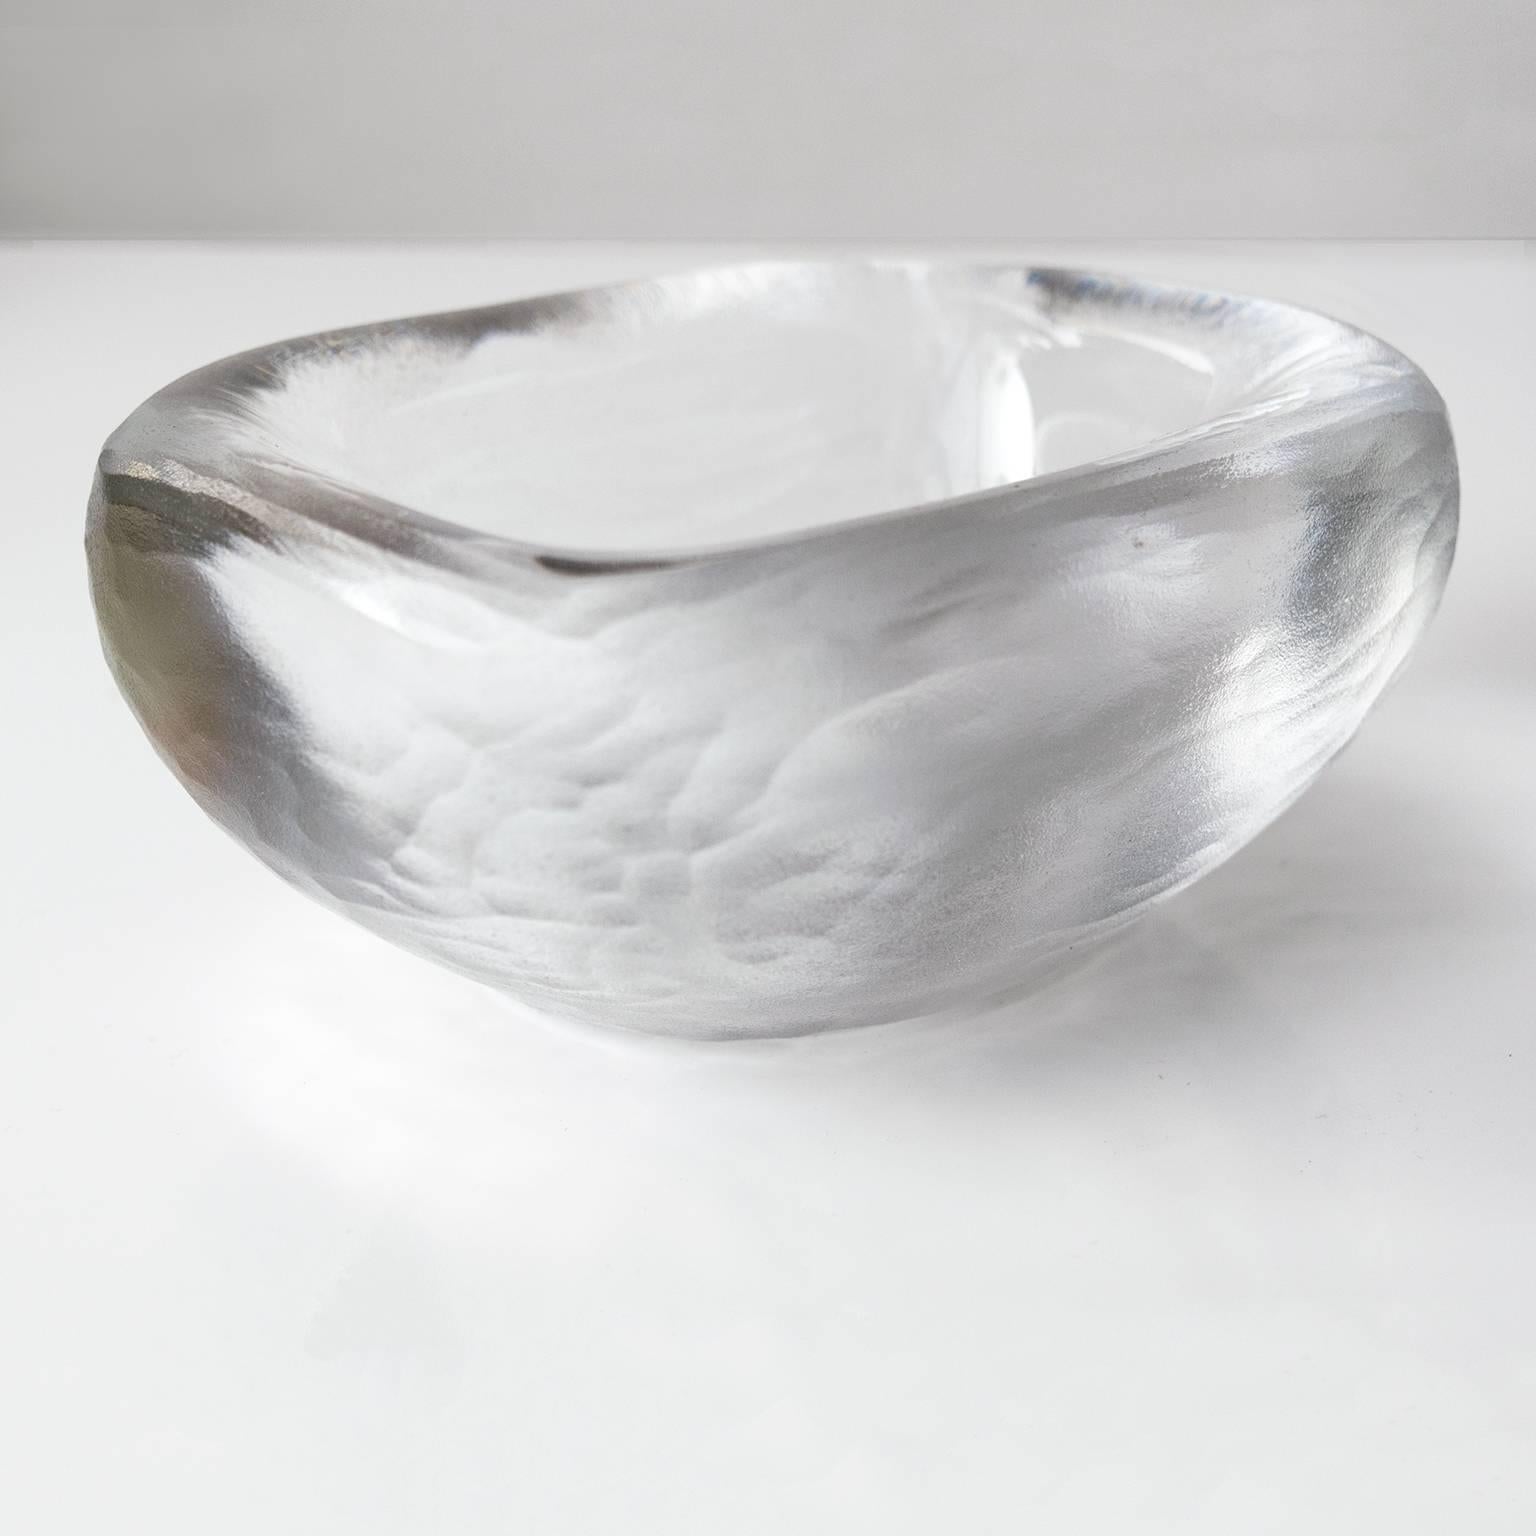 A Scandinavian Modern battuto technique crystal bowl by Swedish designer Vicke Lindstrand for Orrefors. This bowl is from Lindstrand's 